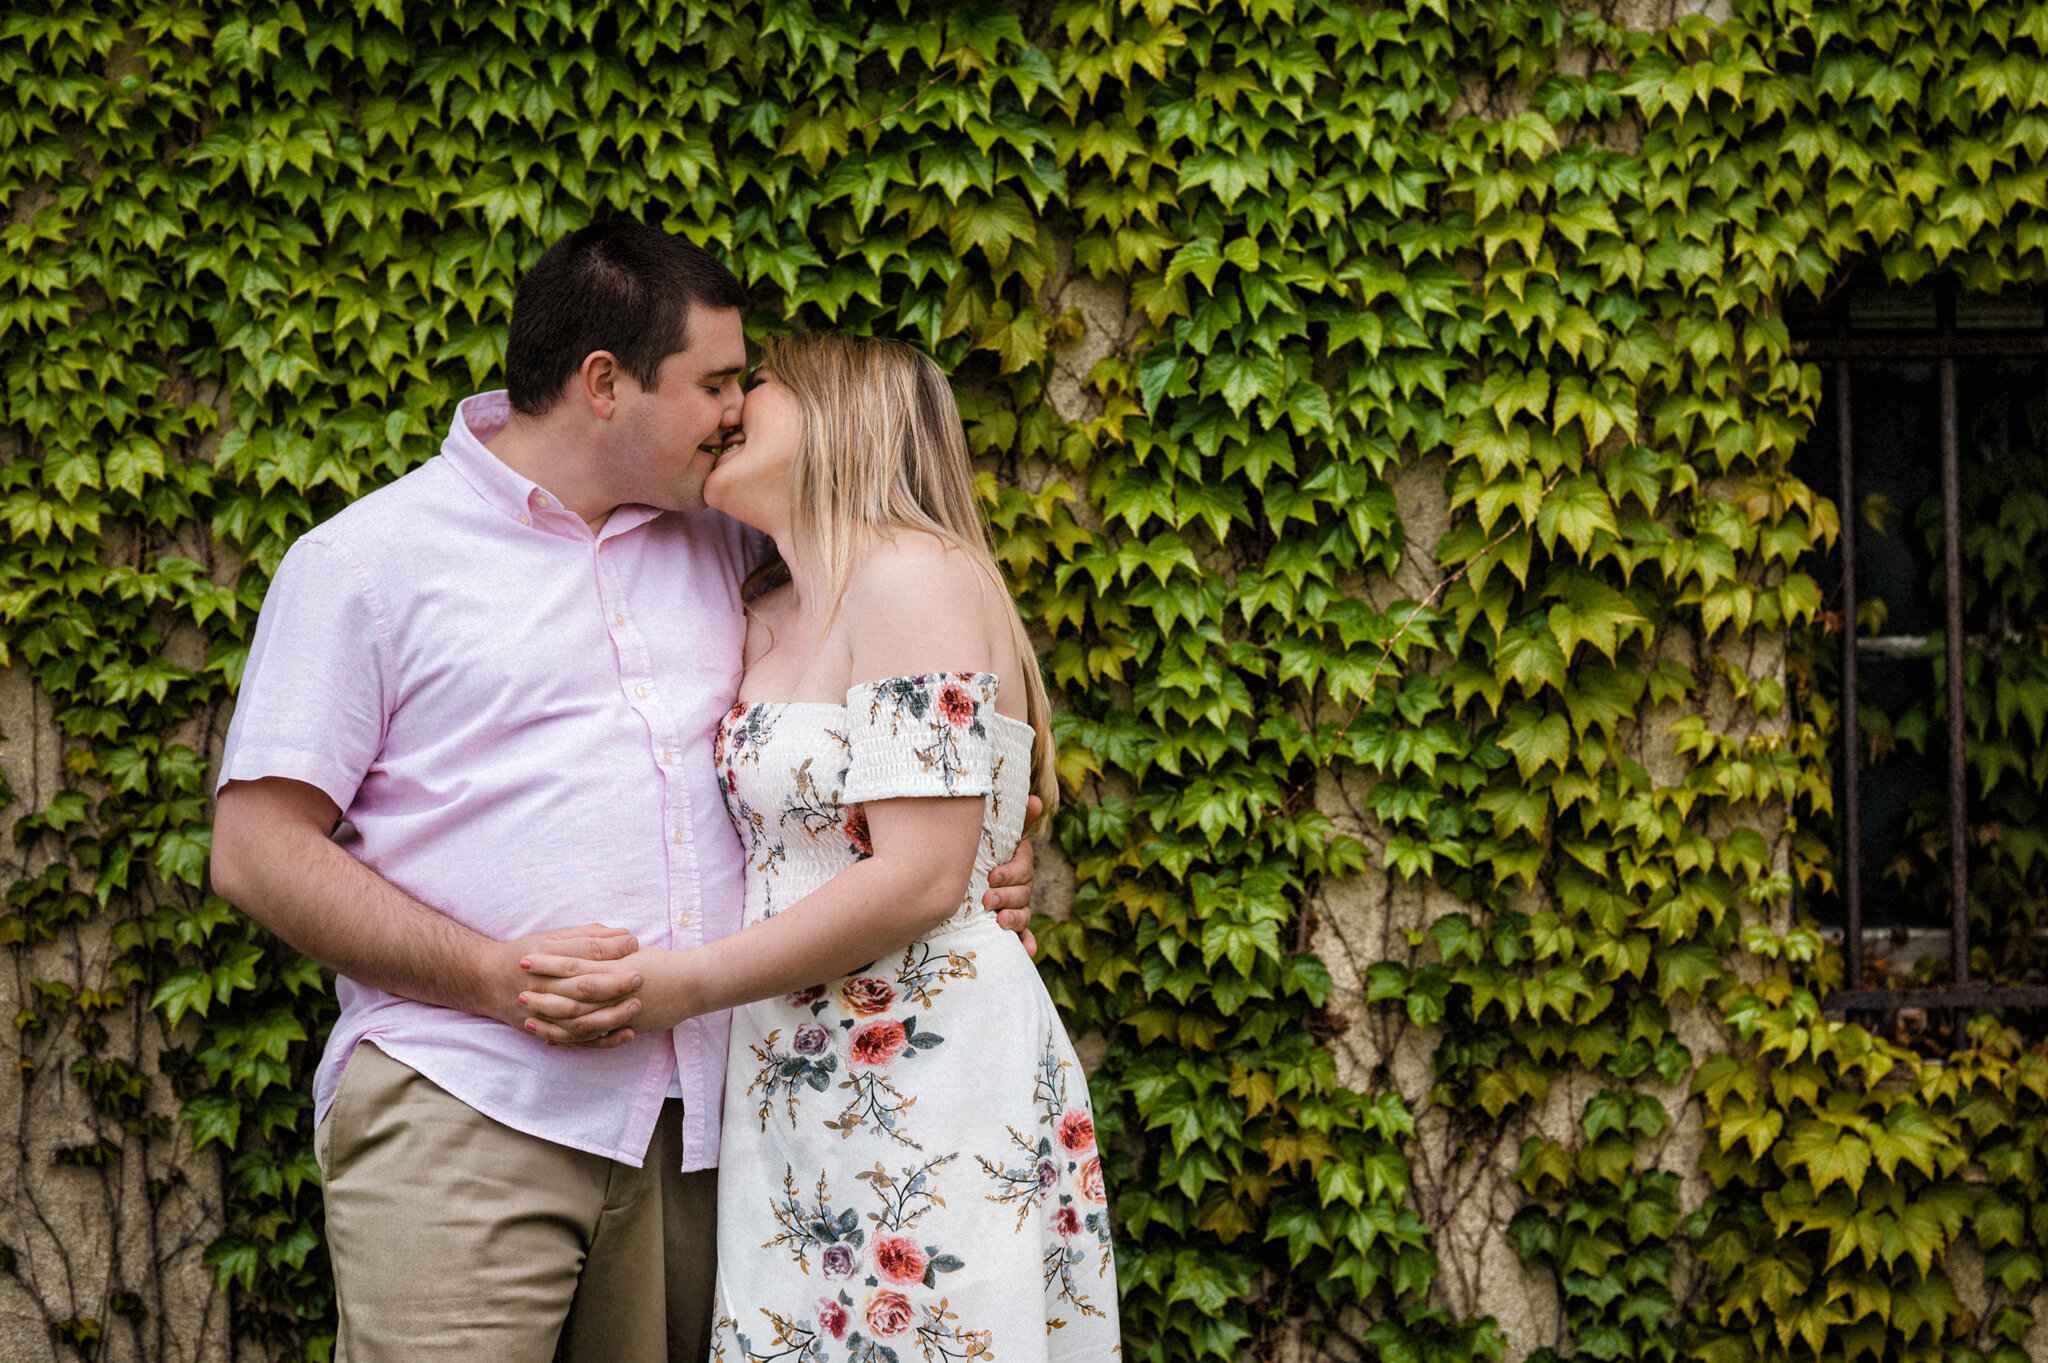 Beauty_and_Life_Captured_Taylor_and_Drew_Engagement-65.jpg